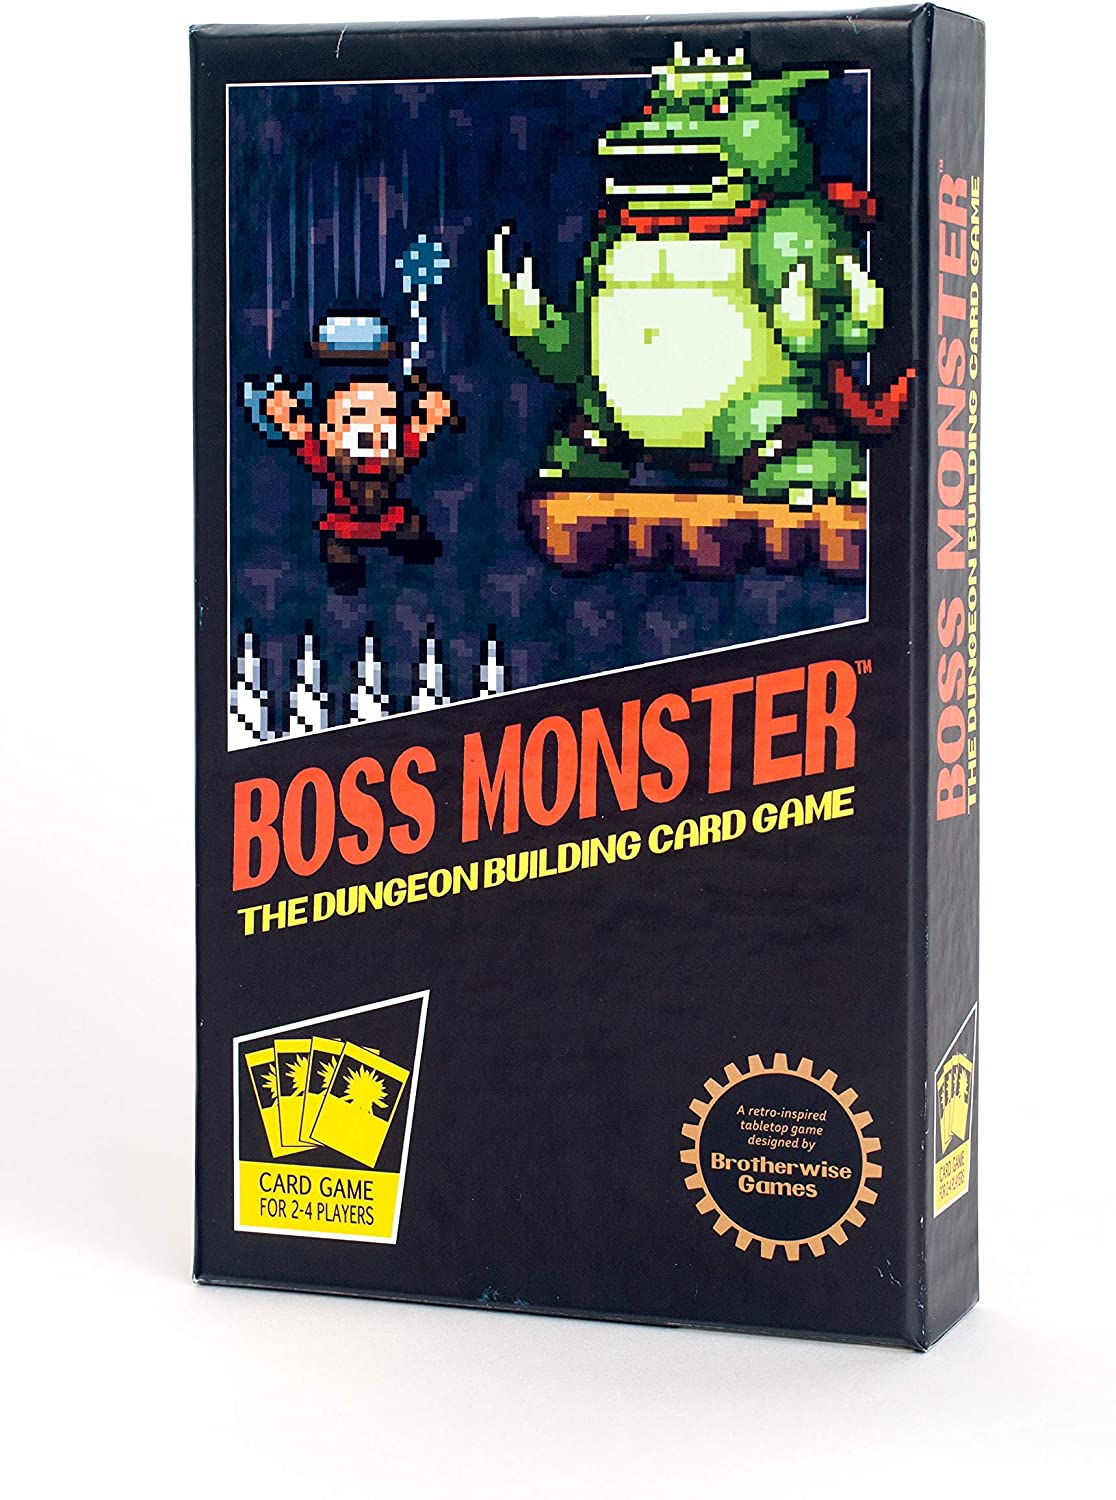 BOSS MONSTER: MASTER OF THE DUNGEON